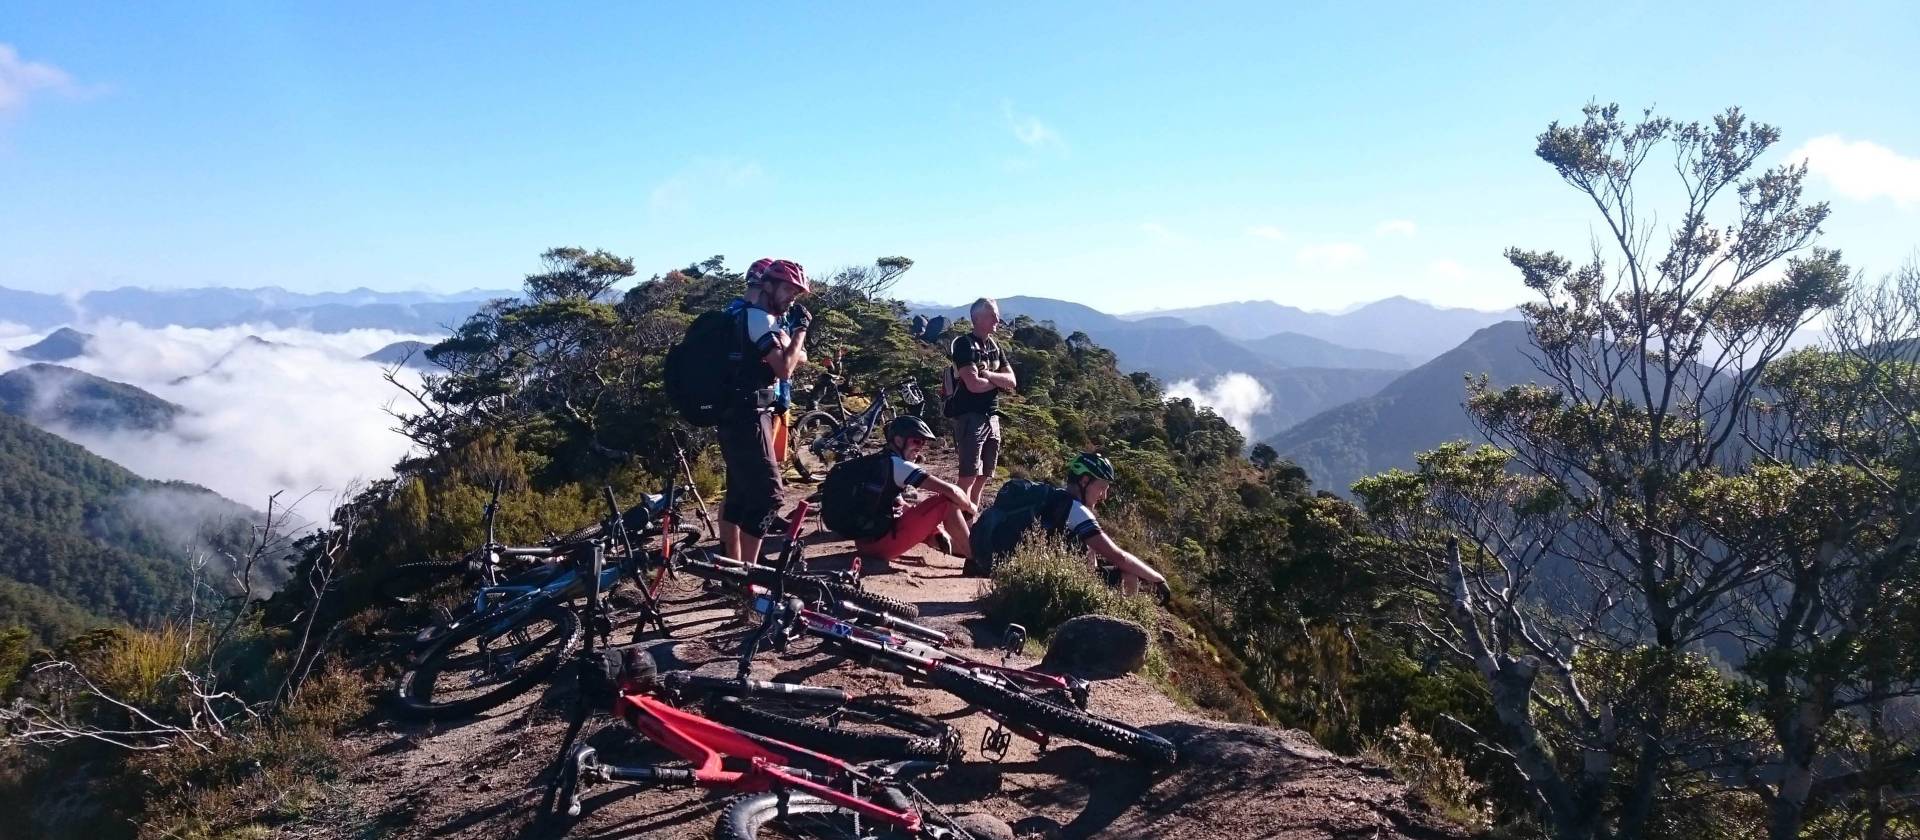 Mountain Bike Tours Nz Old Ghost Road And St James Trails - 